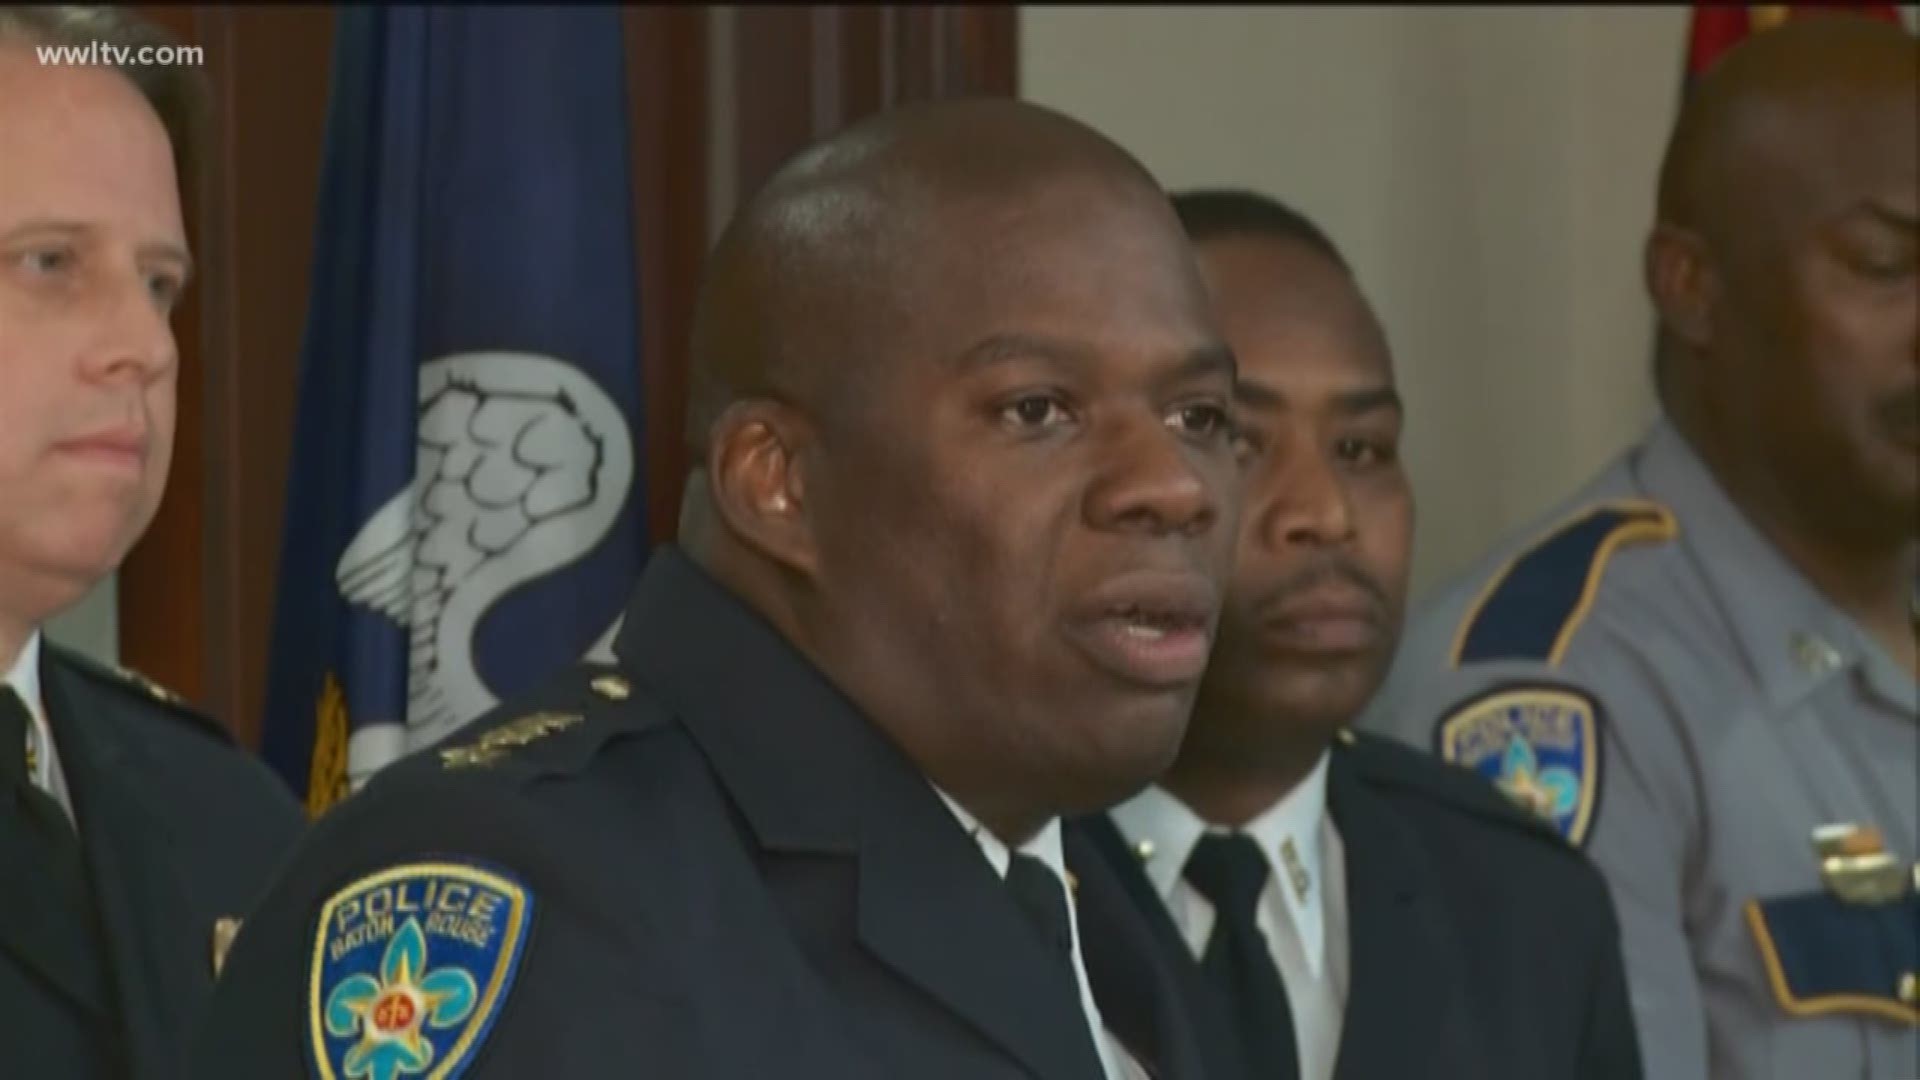 Baton Rouge Police Chief announces decision on officers involved in Alton Sterling shooting